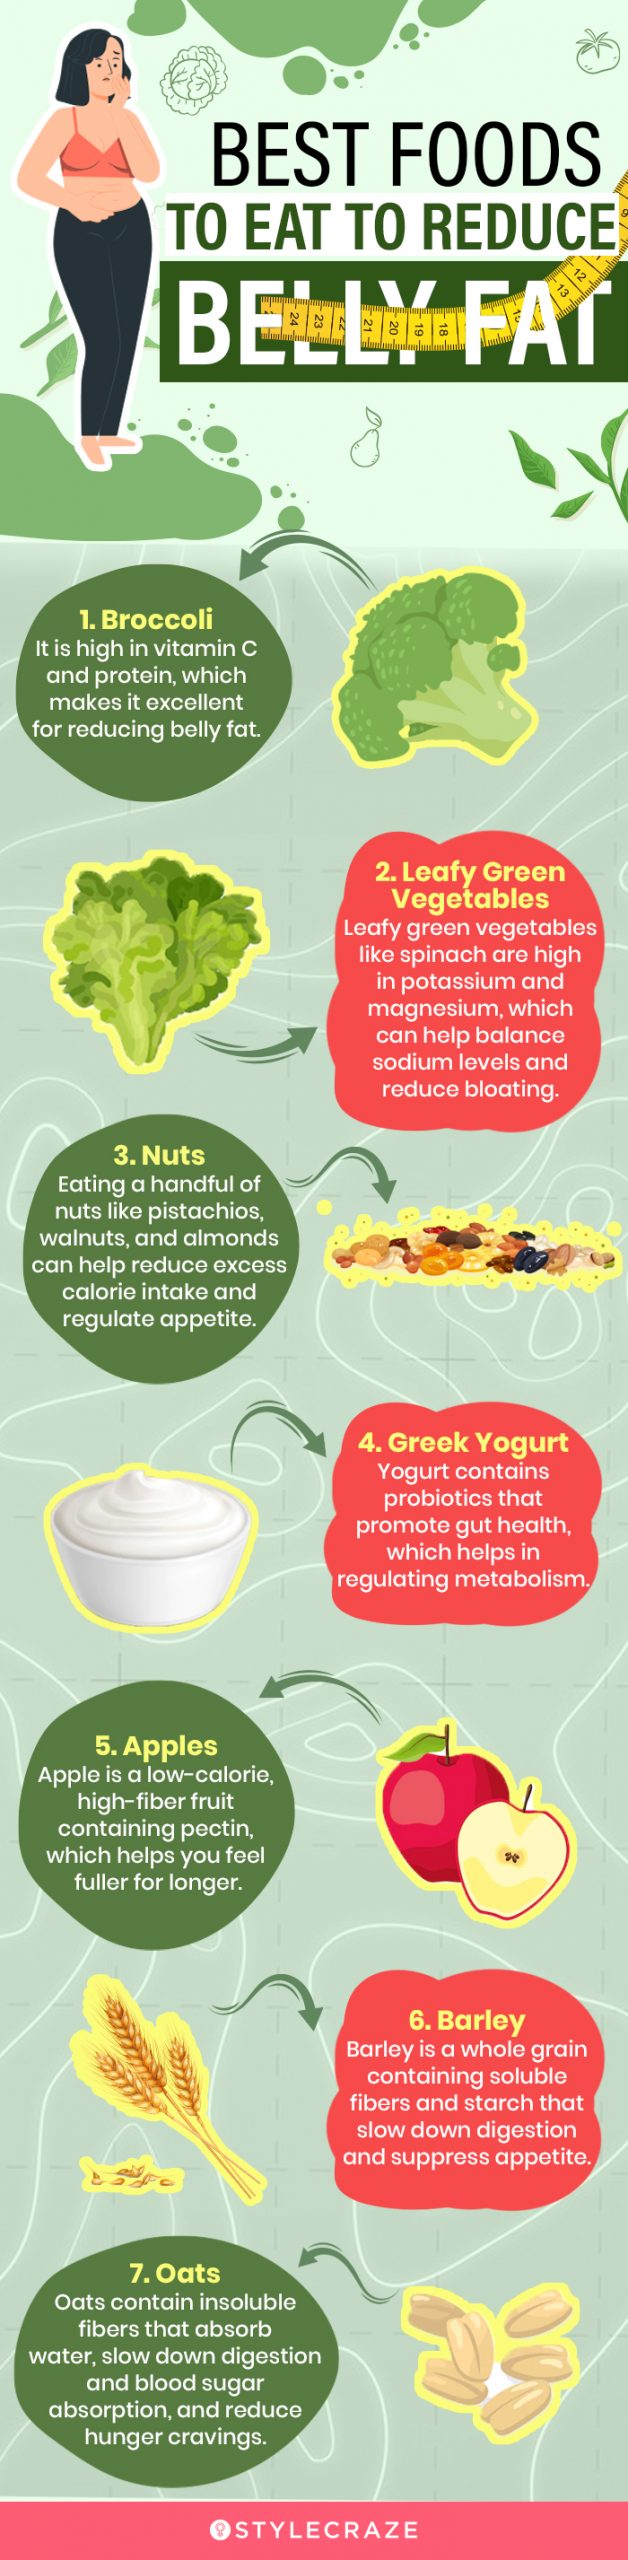 best foods to eat to reduce belly fat (infographic)